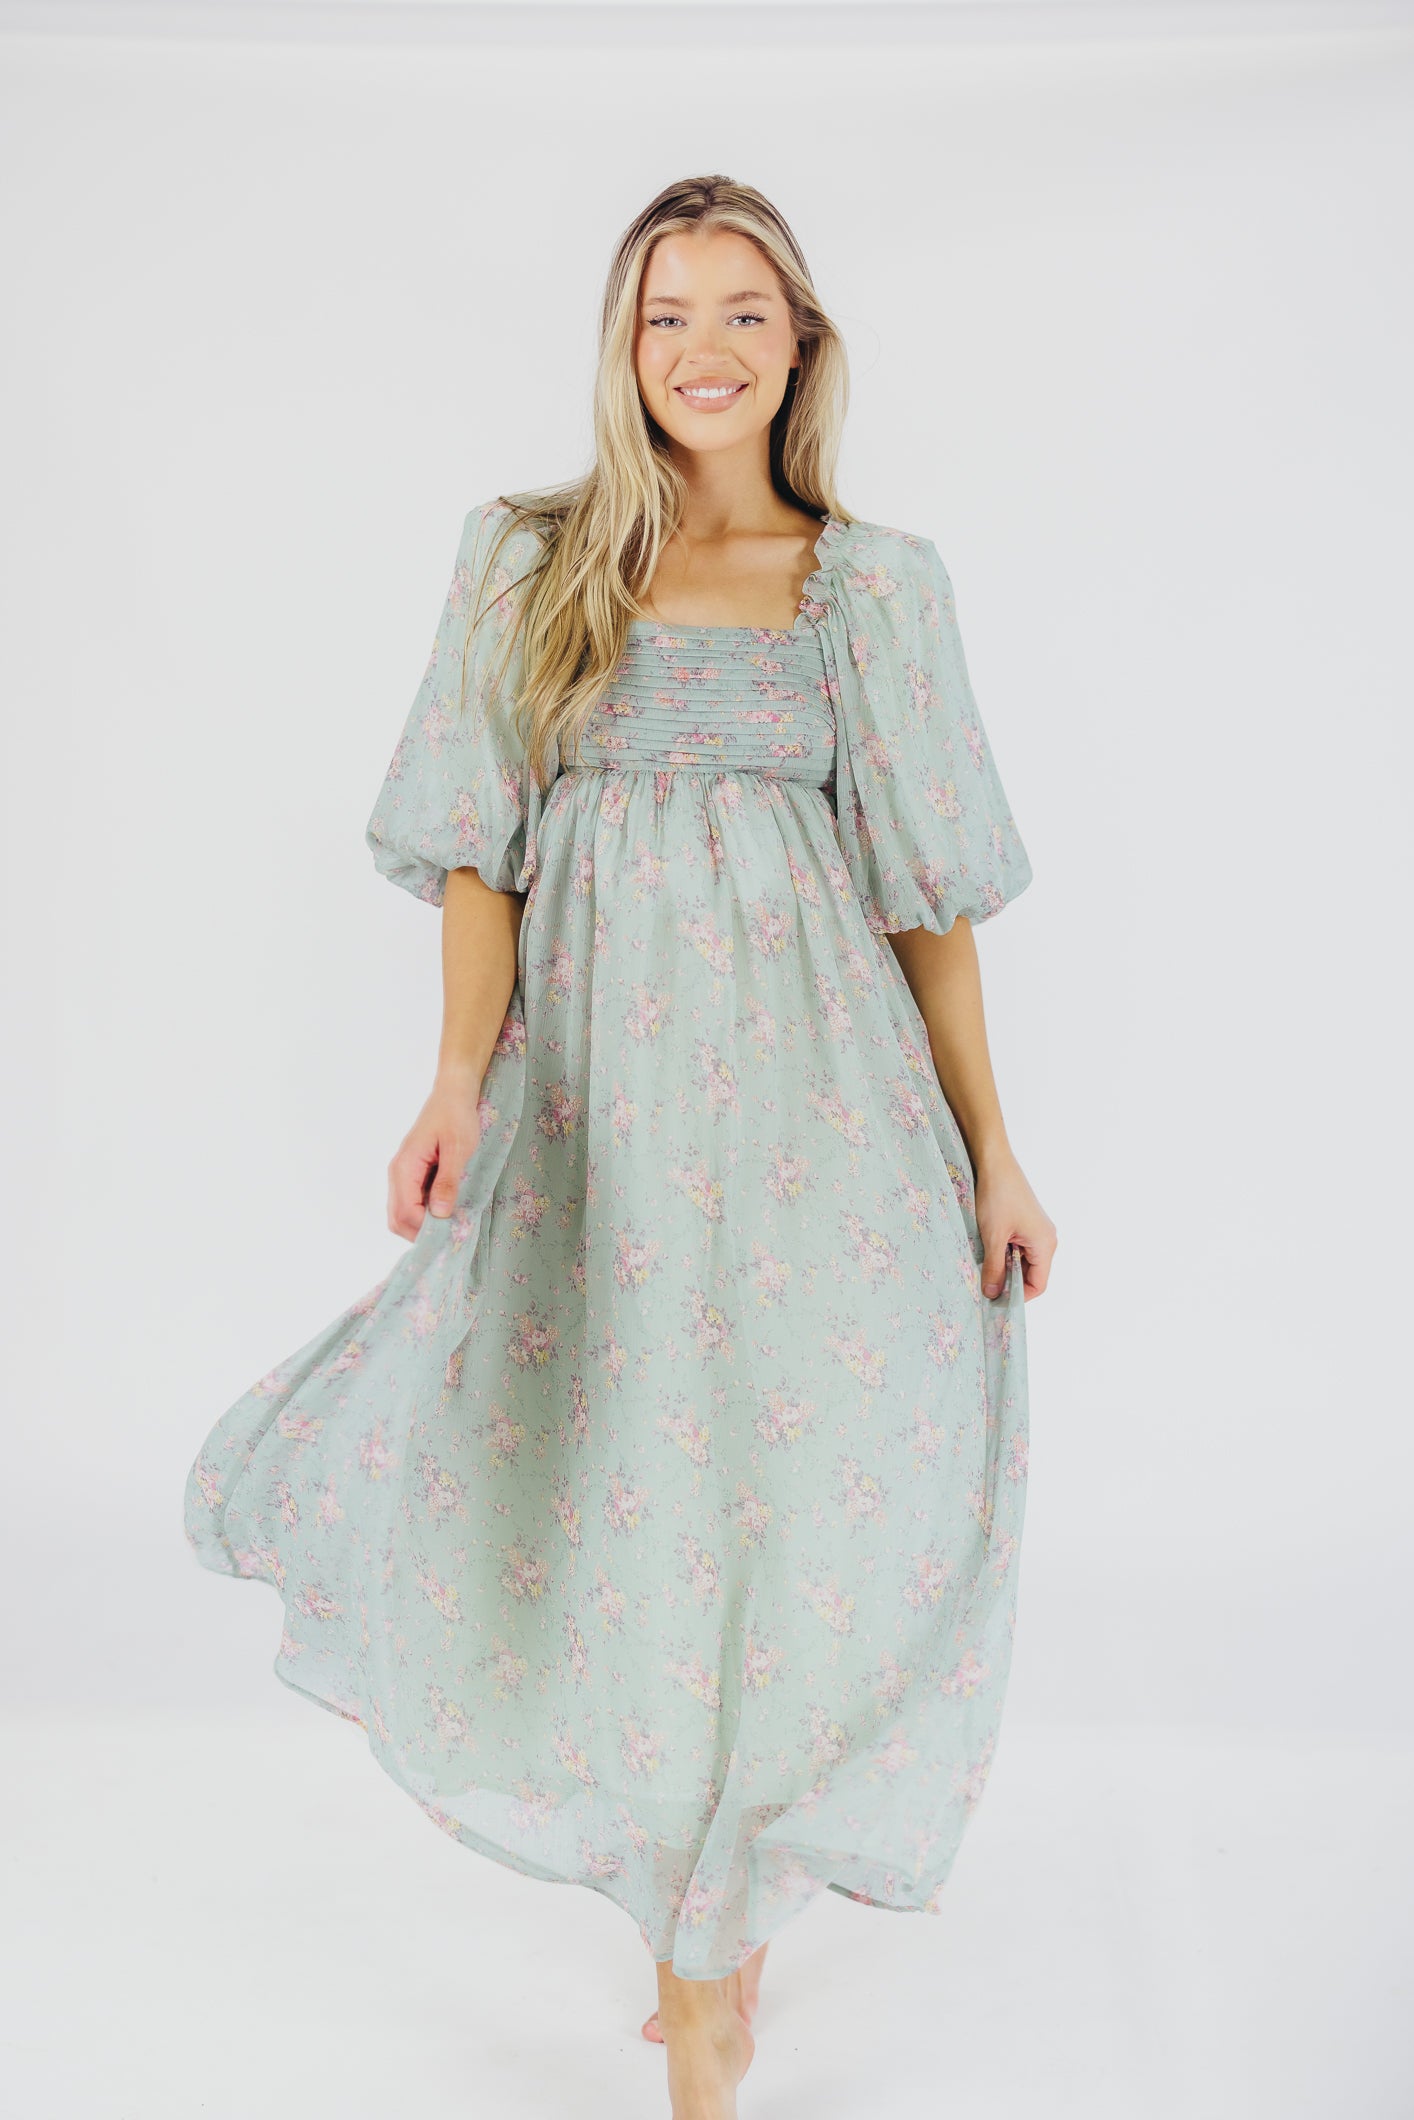 Melody Maxi Dress in Turquoise Floral - Bump Friendly & Inclusive Sizing (S-3XL)